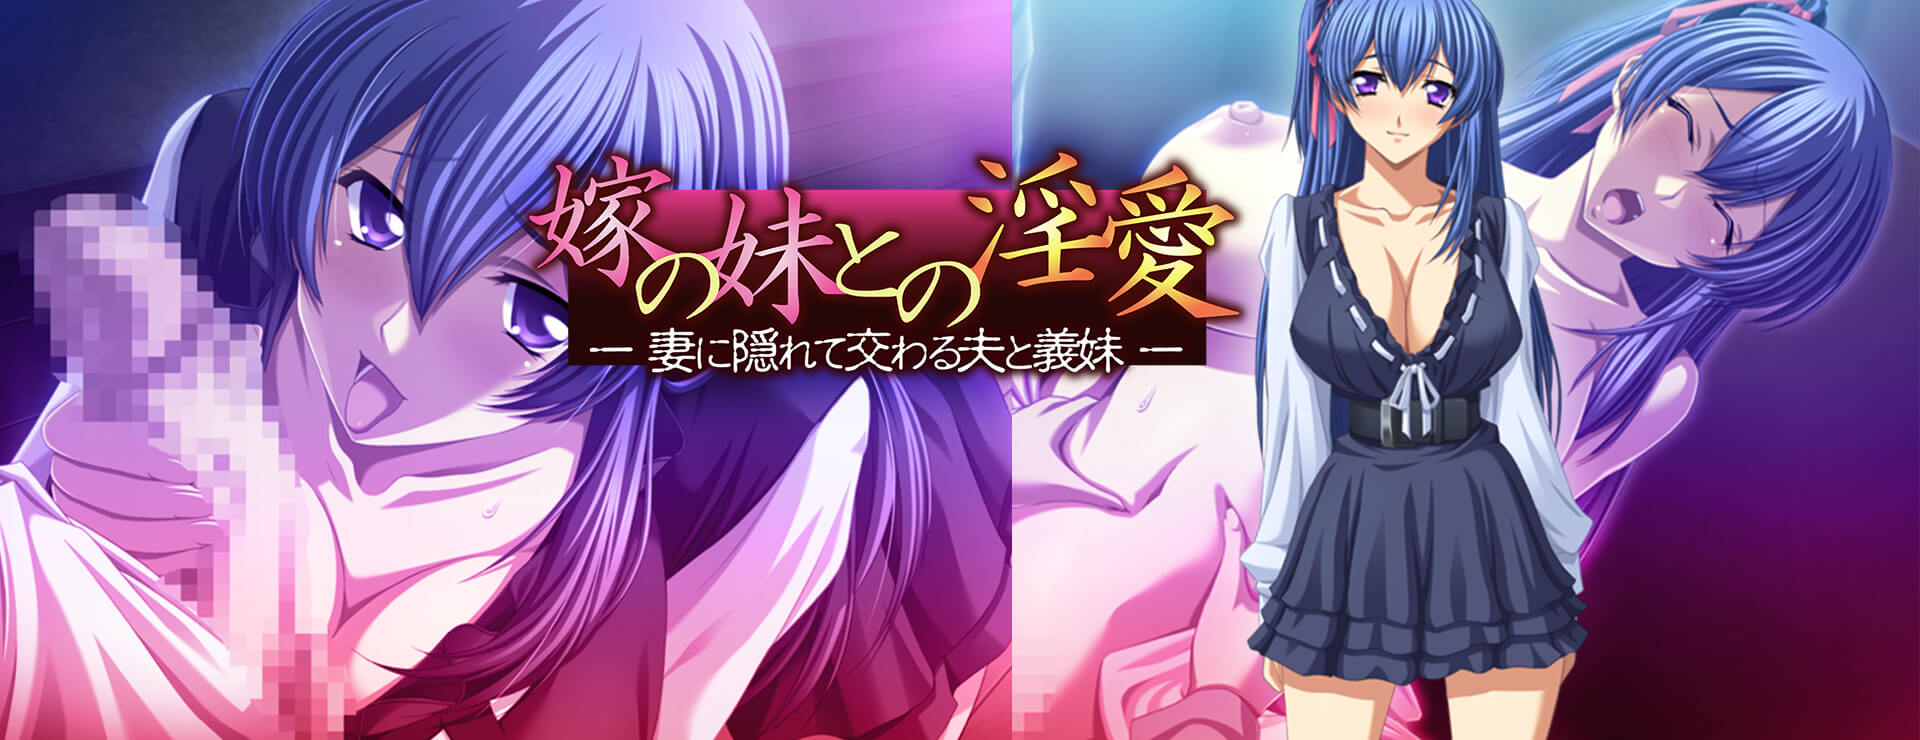 Forbidden Love with My Wife's Sister - ビジュアルノベル ゲーム